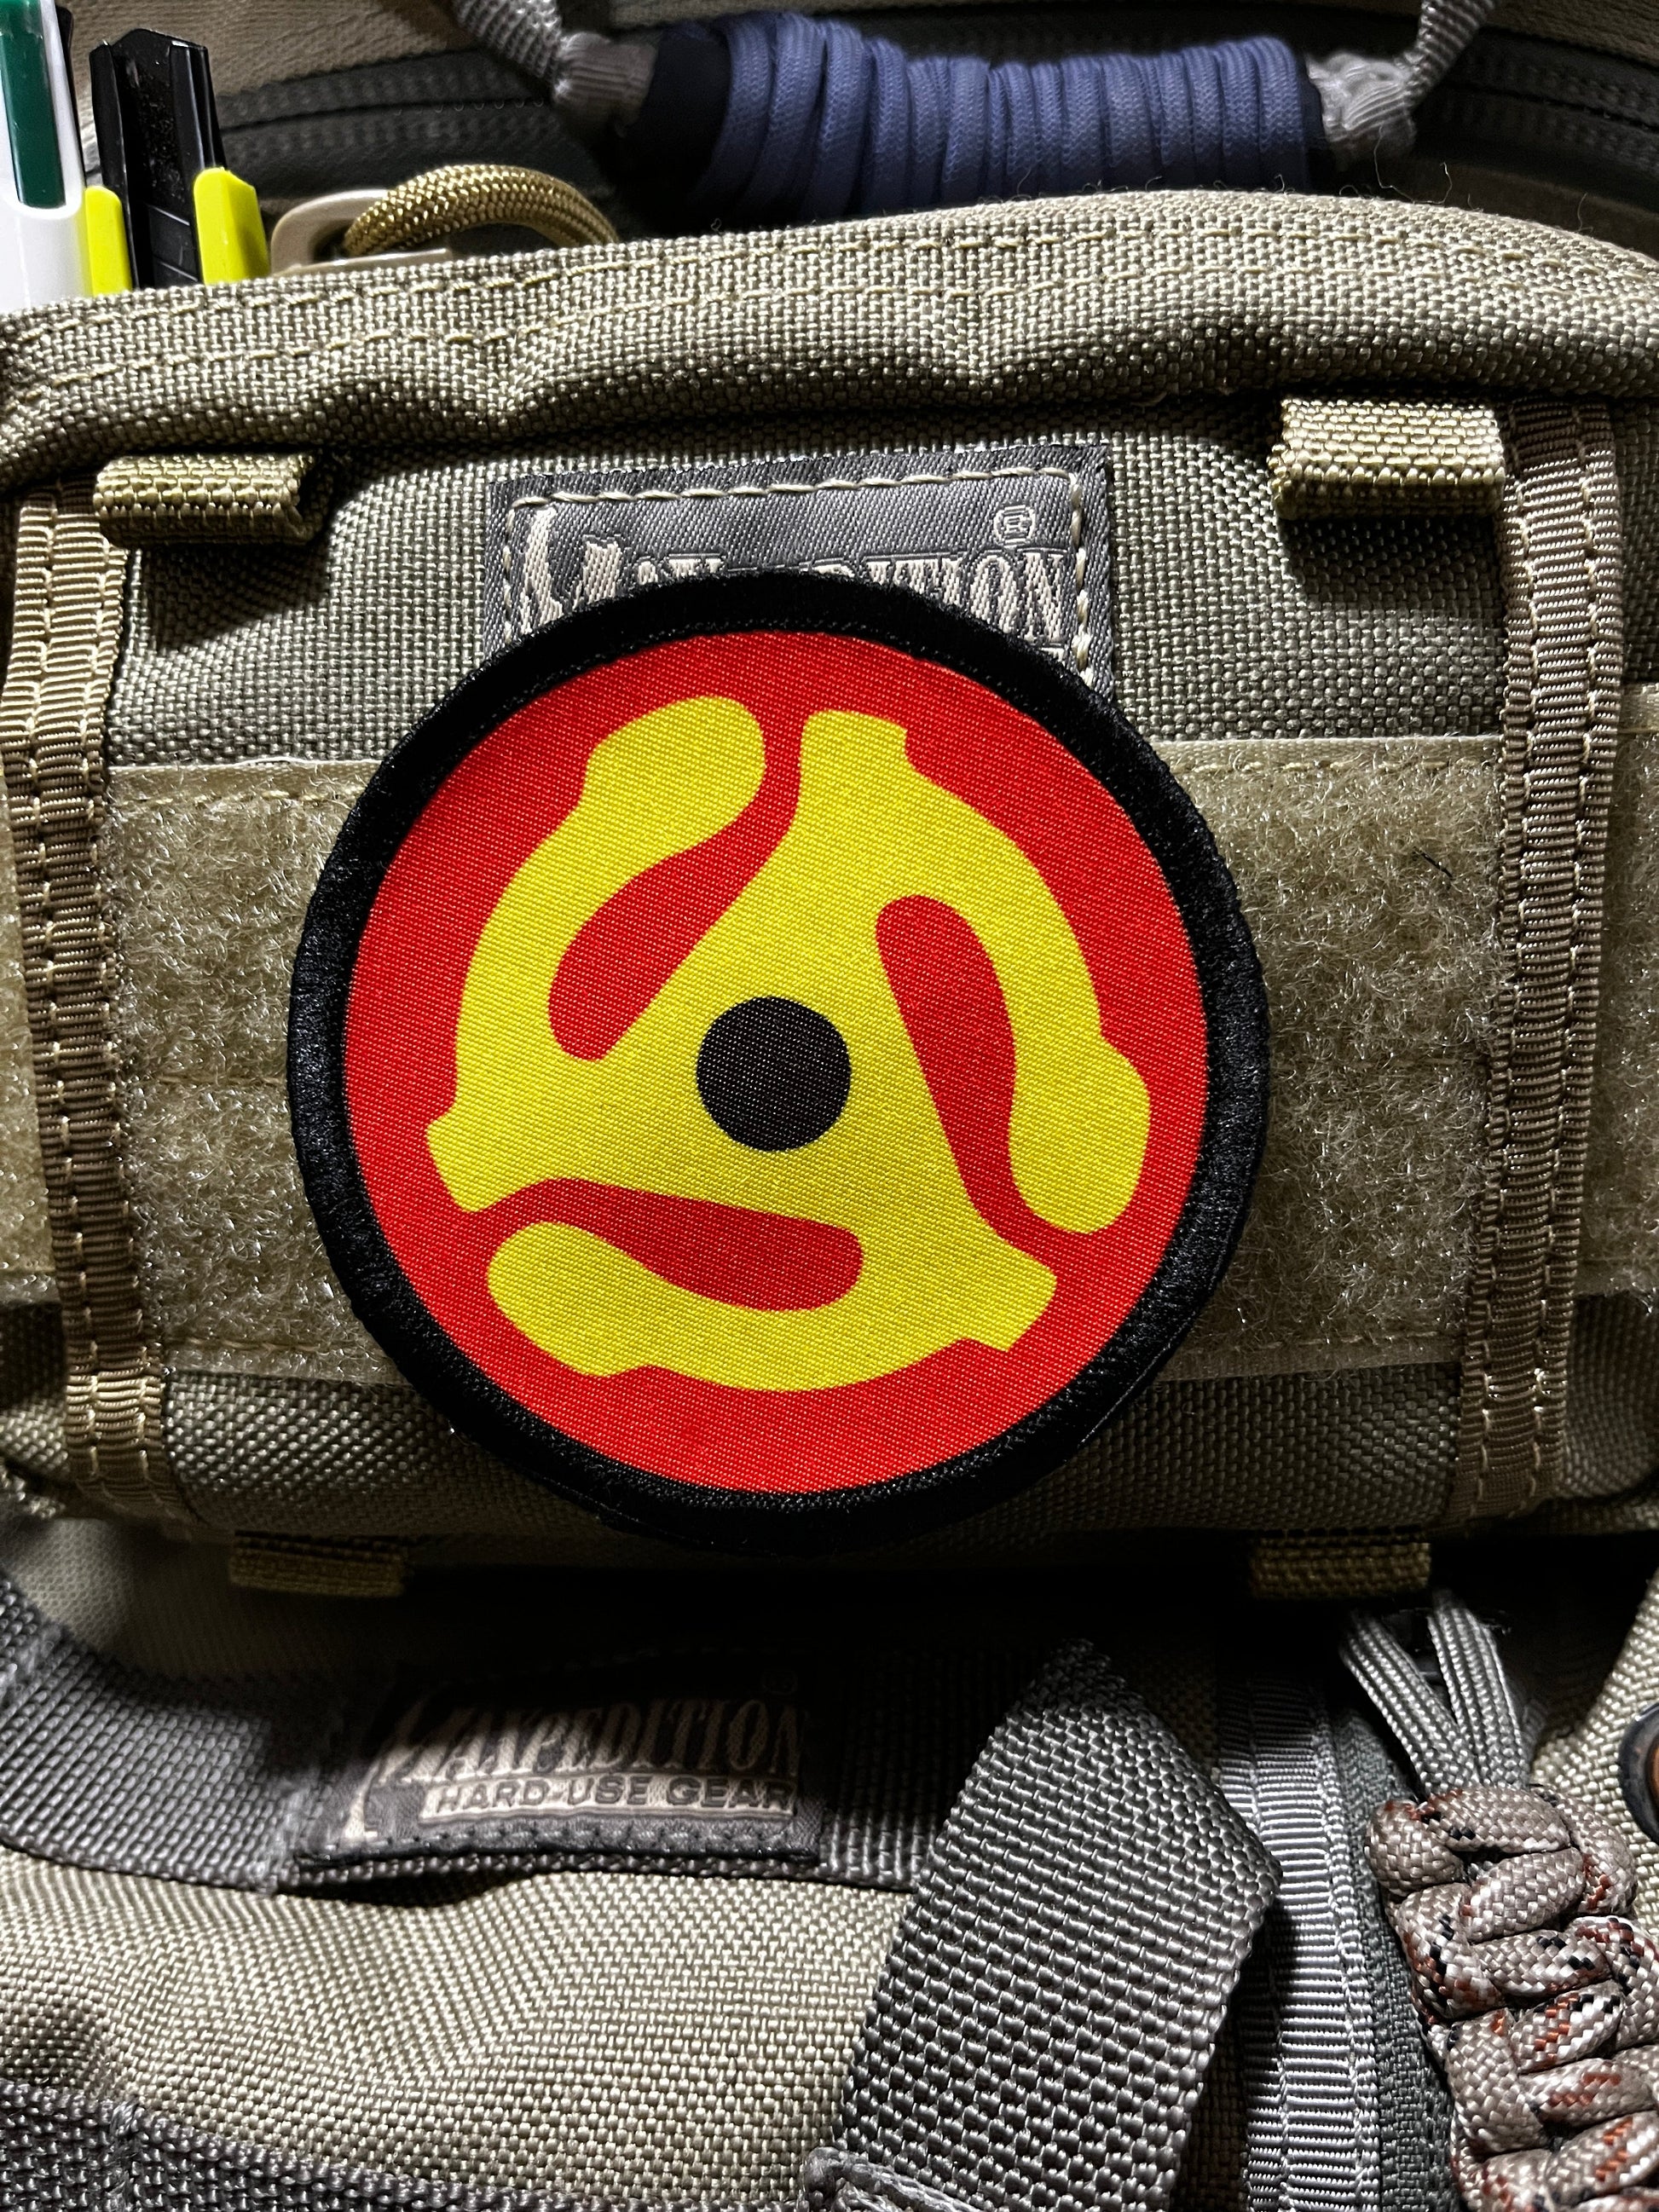 3" Stereo Record Adapter Morale Patch Morale Patches Redheaded T Shirts 